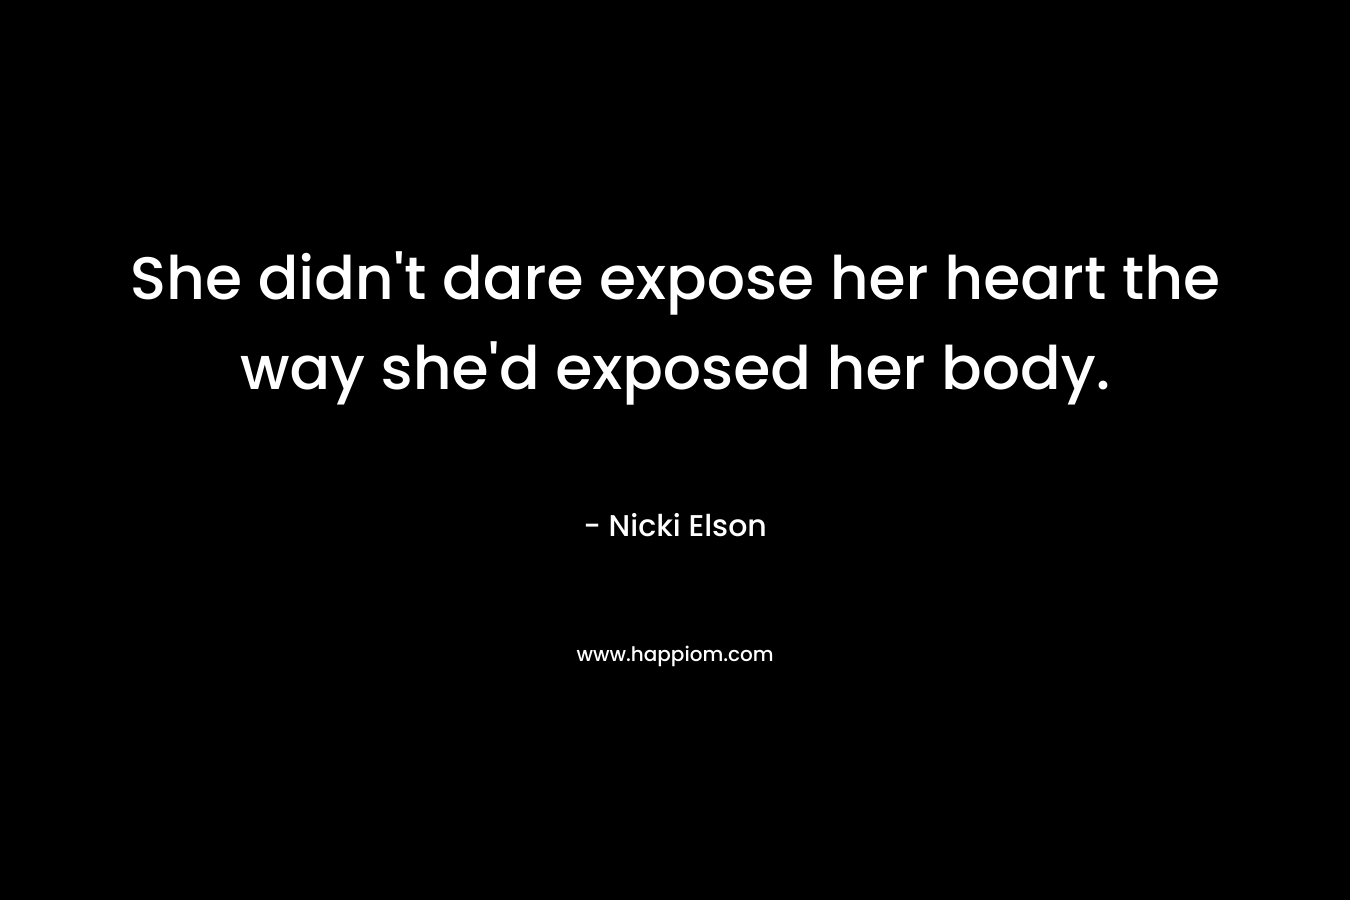 She didn't dare expose her heart the way she'd exposed her body.